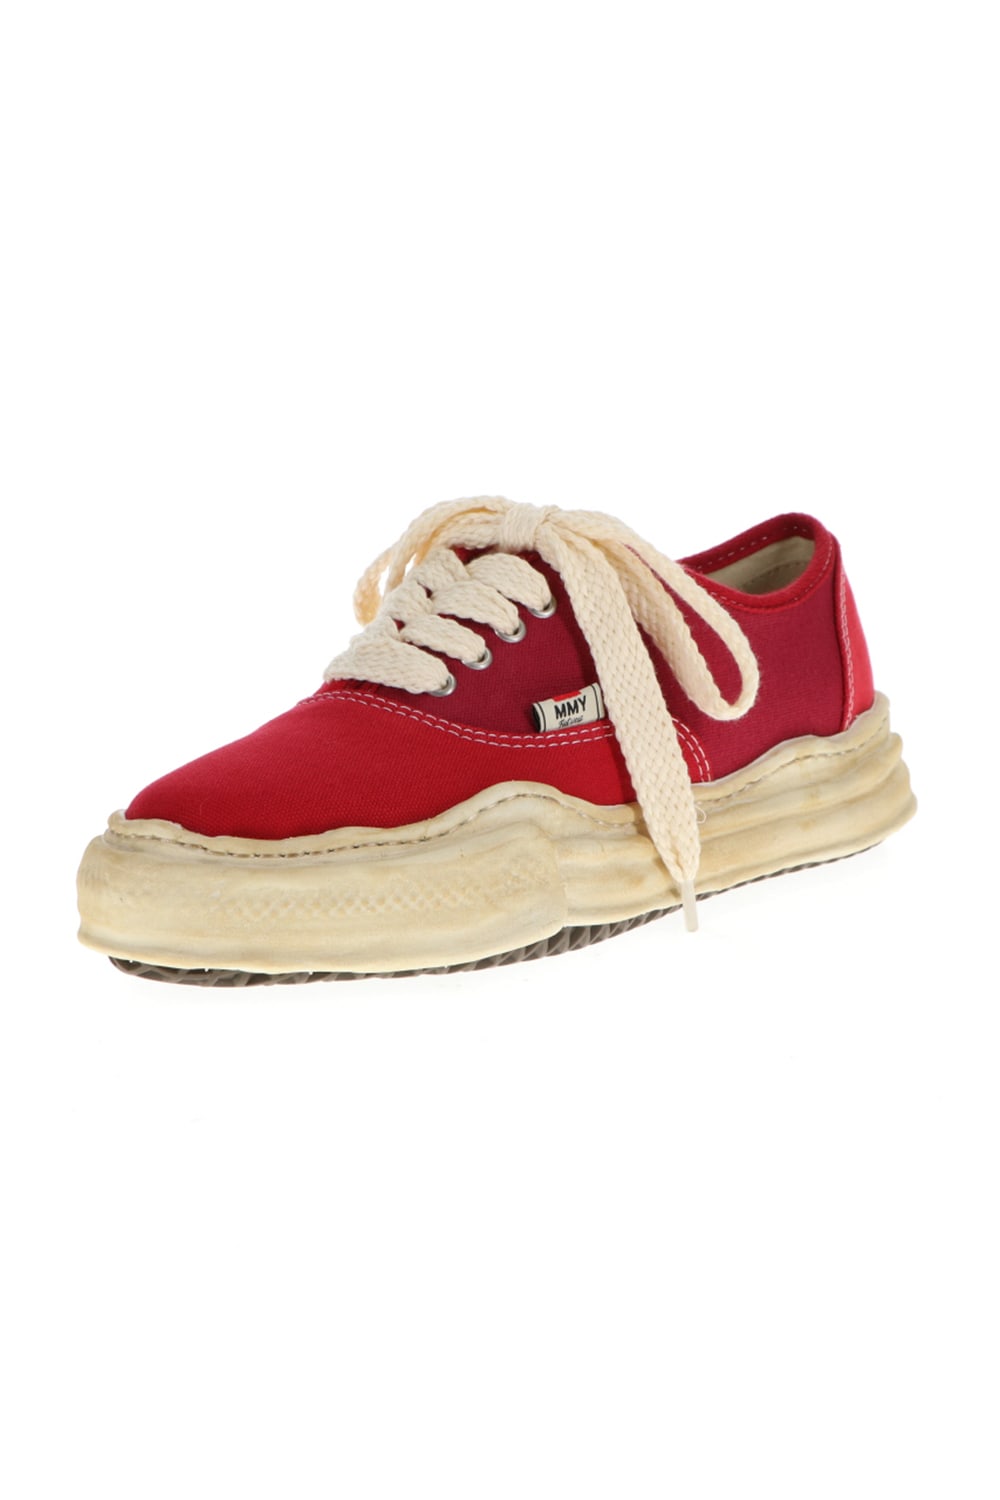 -BAKER- Over-dyed original sole canvas Low-Top sneakers Red